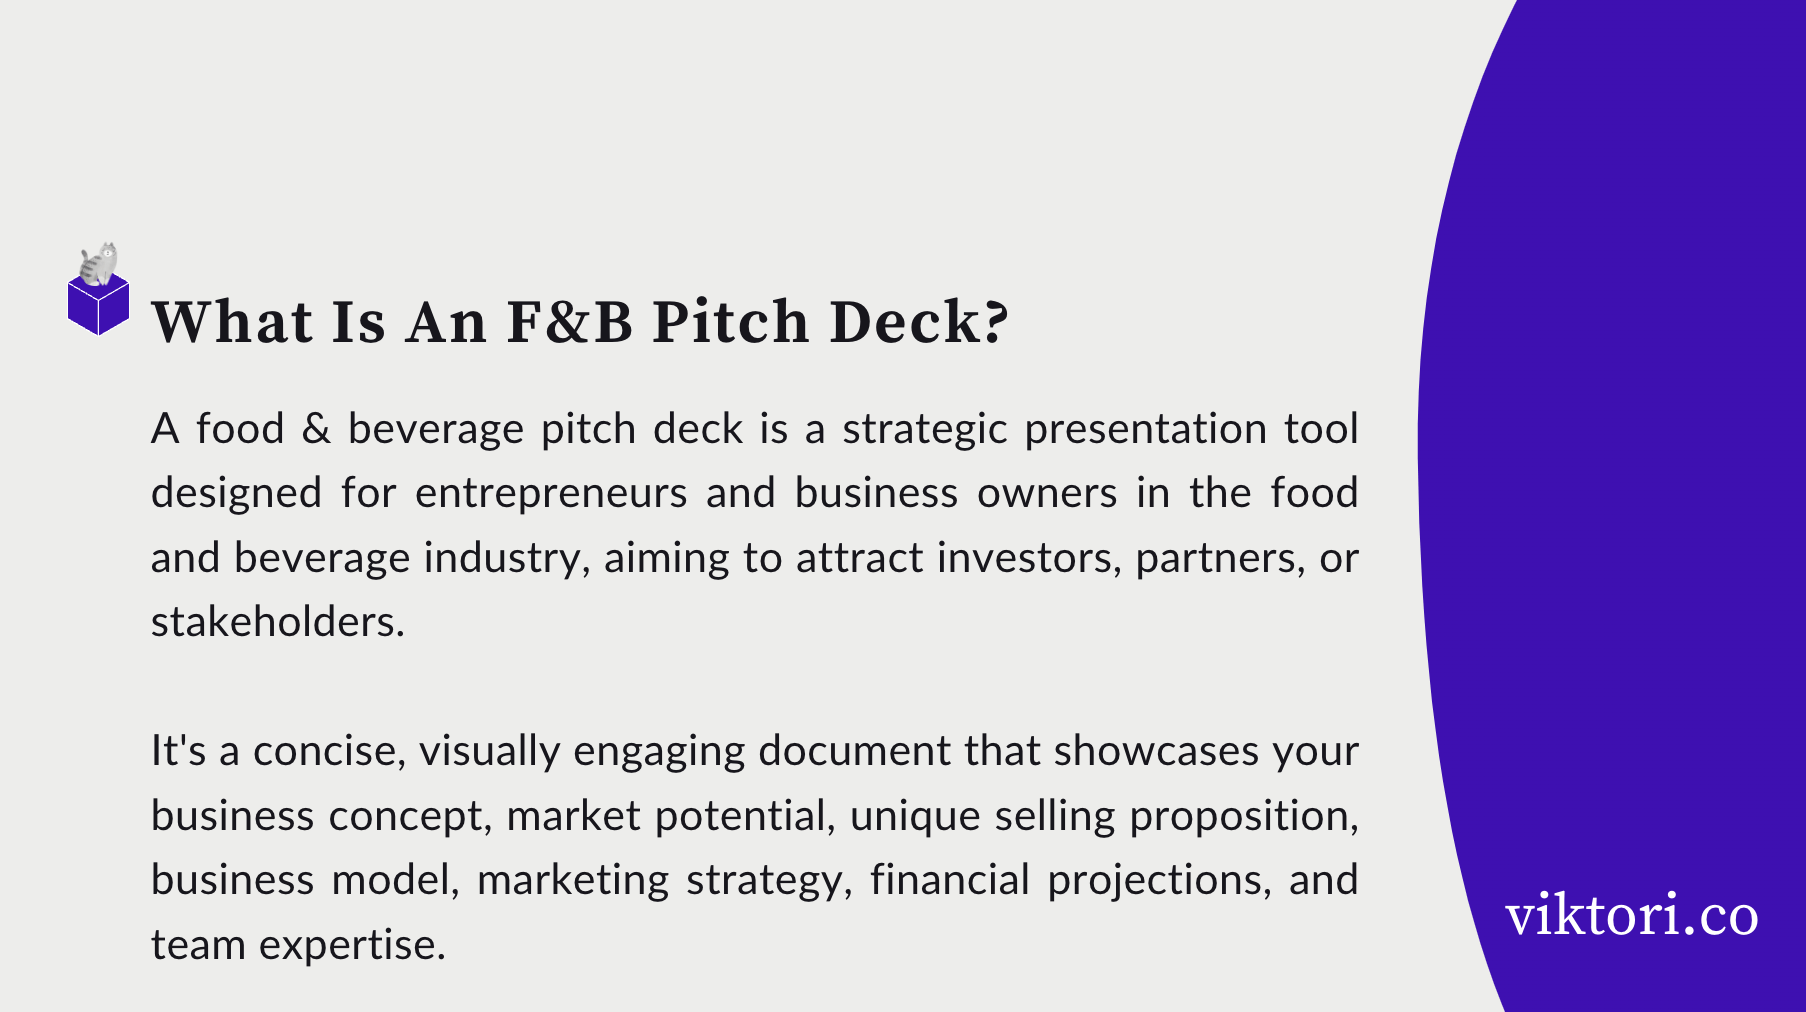 food and beverage pitch deck definition